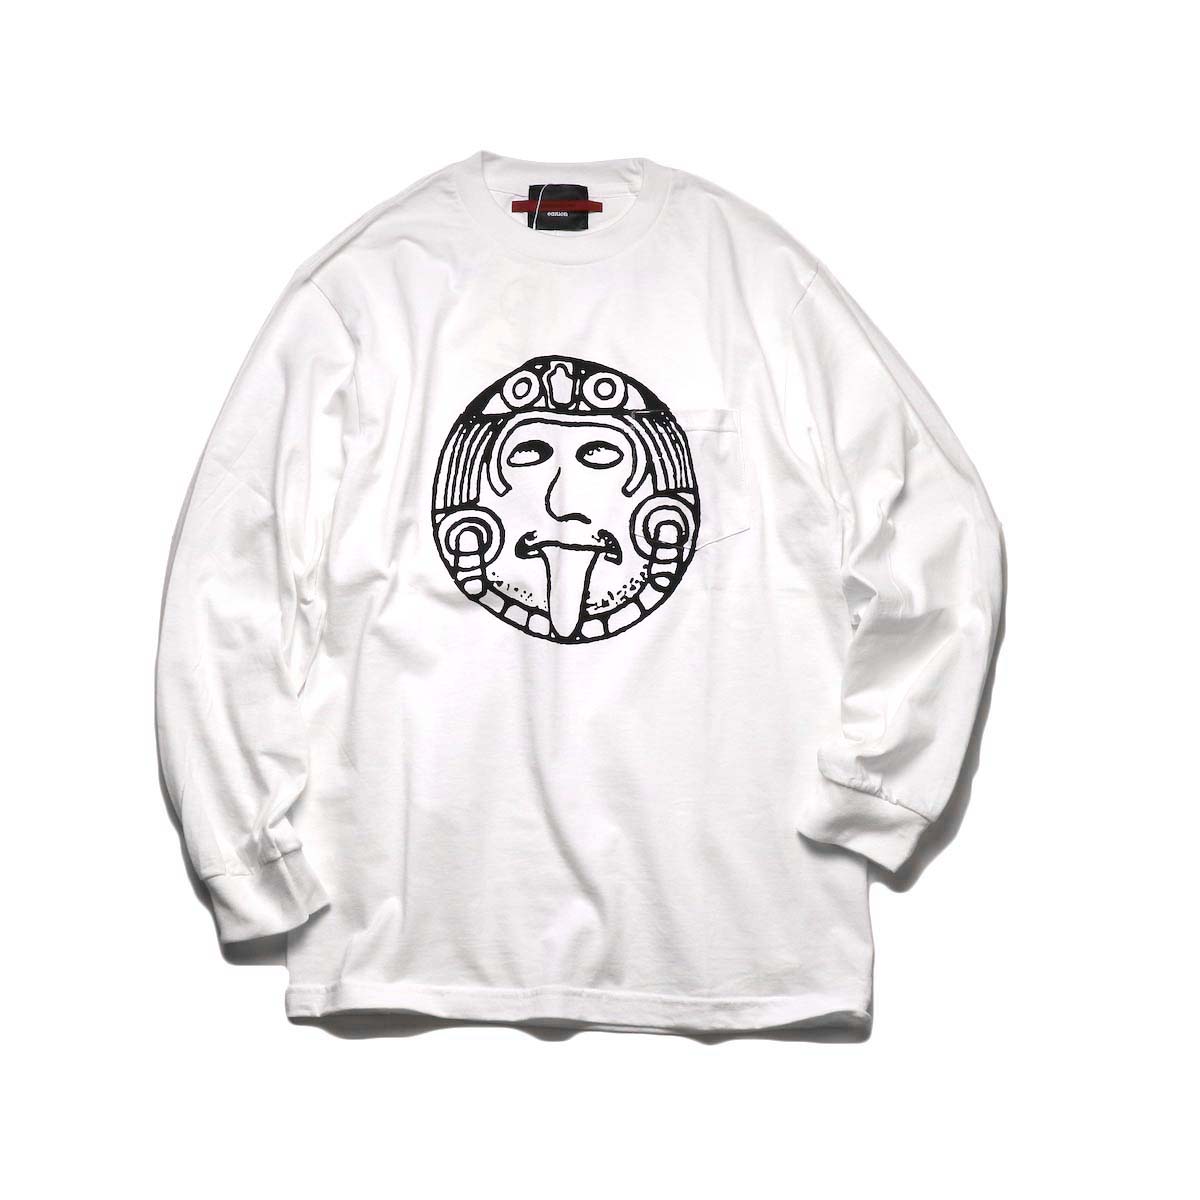 TODAY edition / "FLUX AZTEC" LS Tee (White)